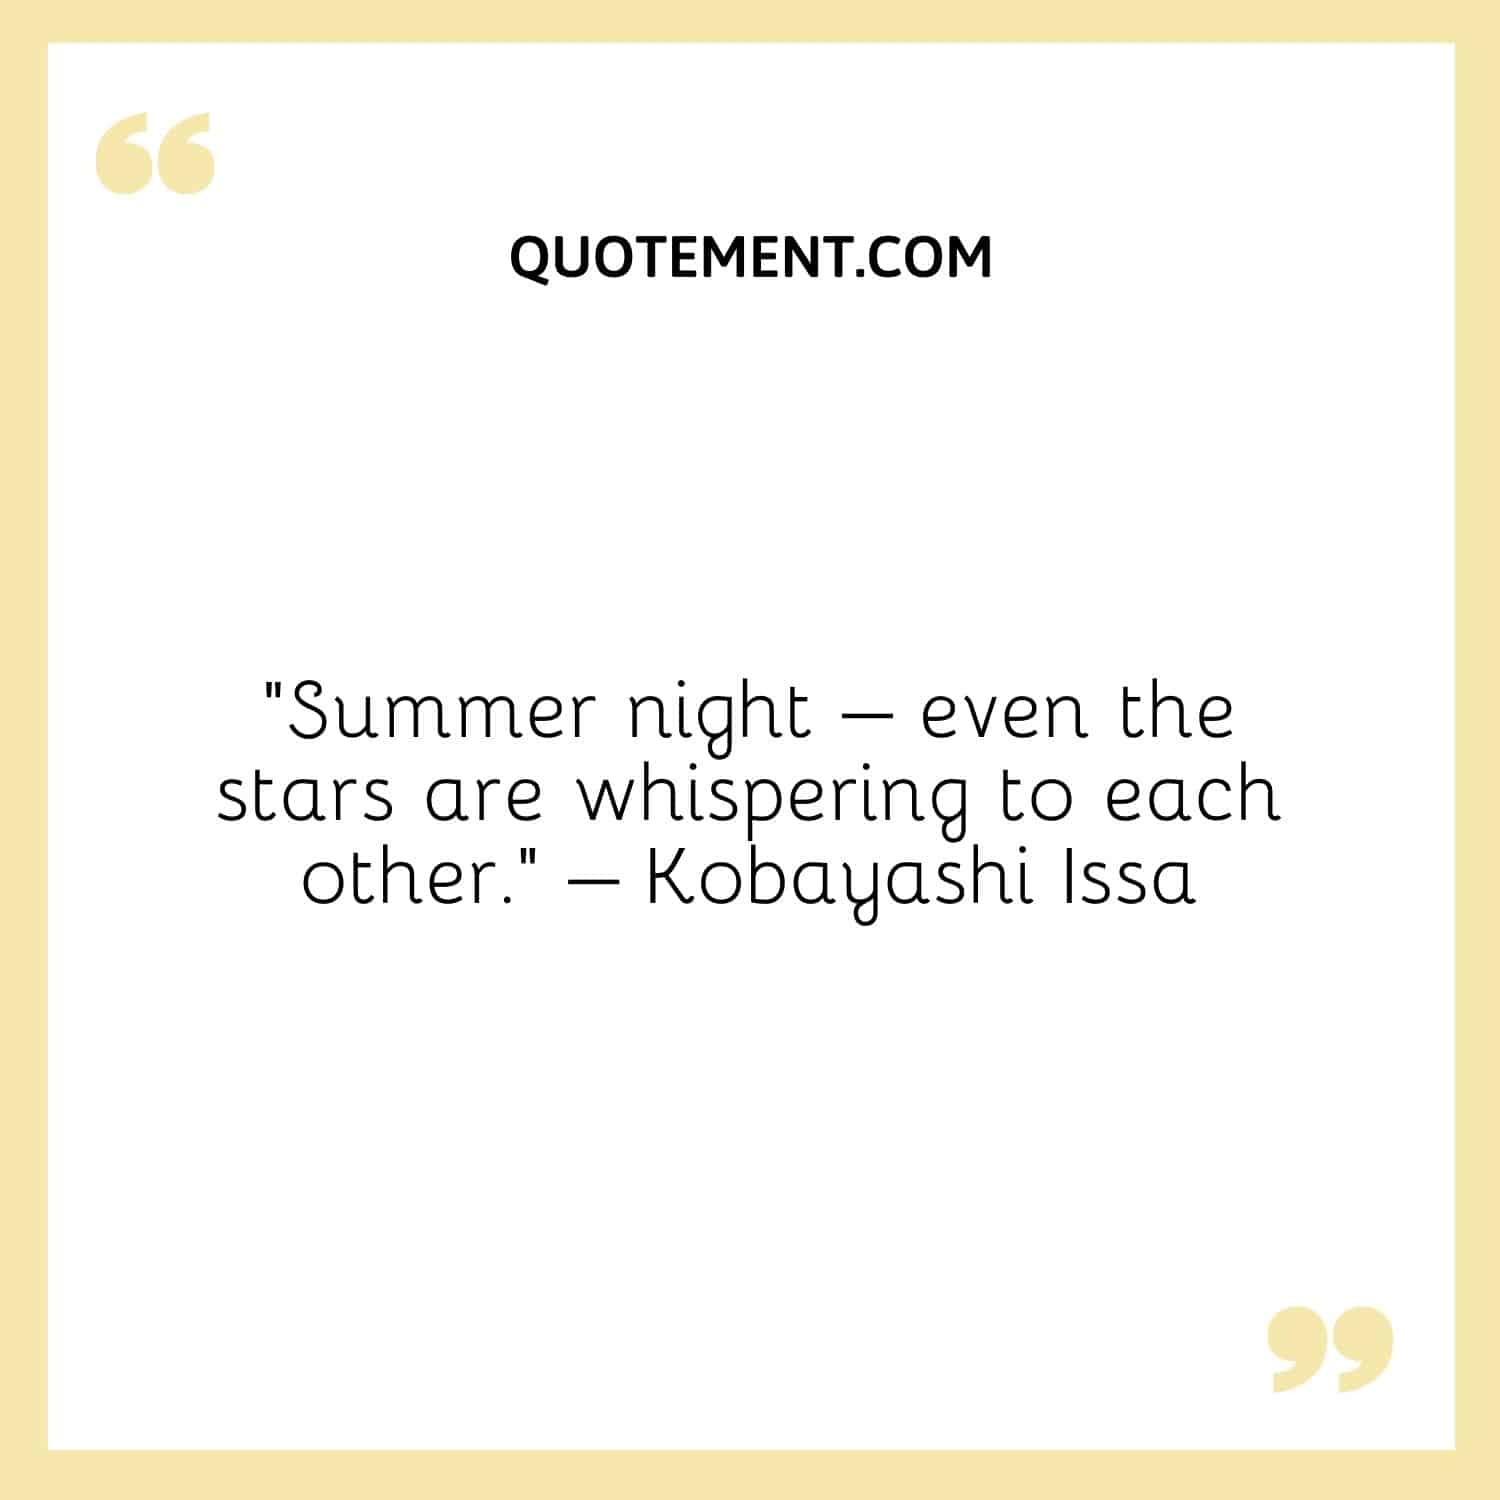 Summer night – even the stars are whispering to each other. – Kobayashi Issa